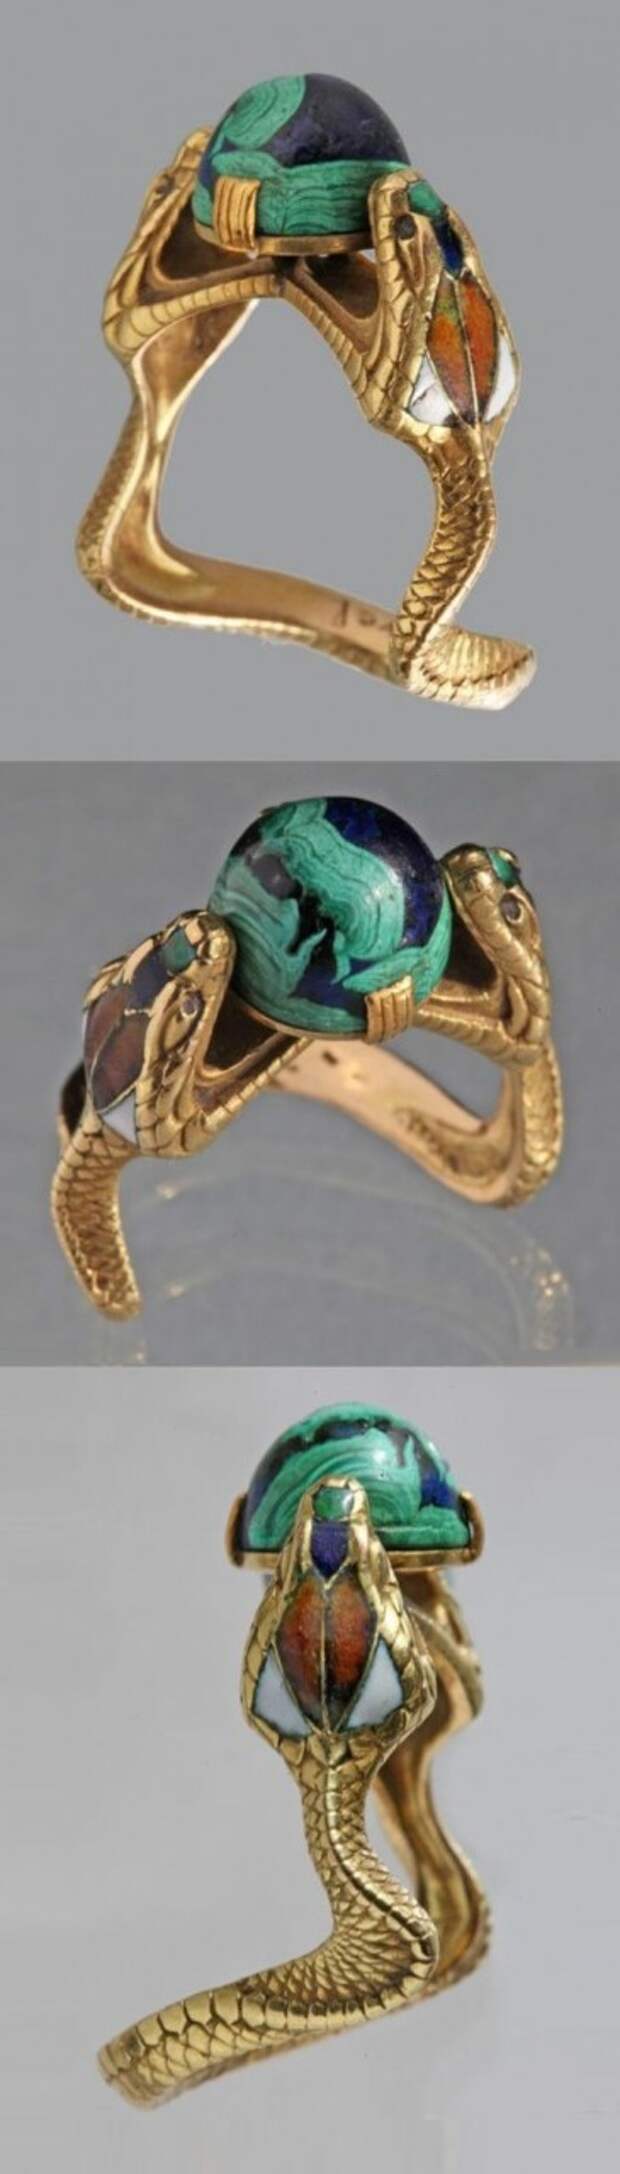 A Symbolist Serpent Ring, CHARLES BOUTET DE MONVEL, French, circa 1900. The…